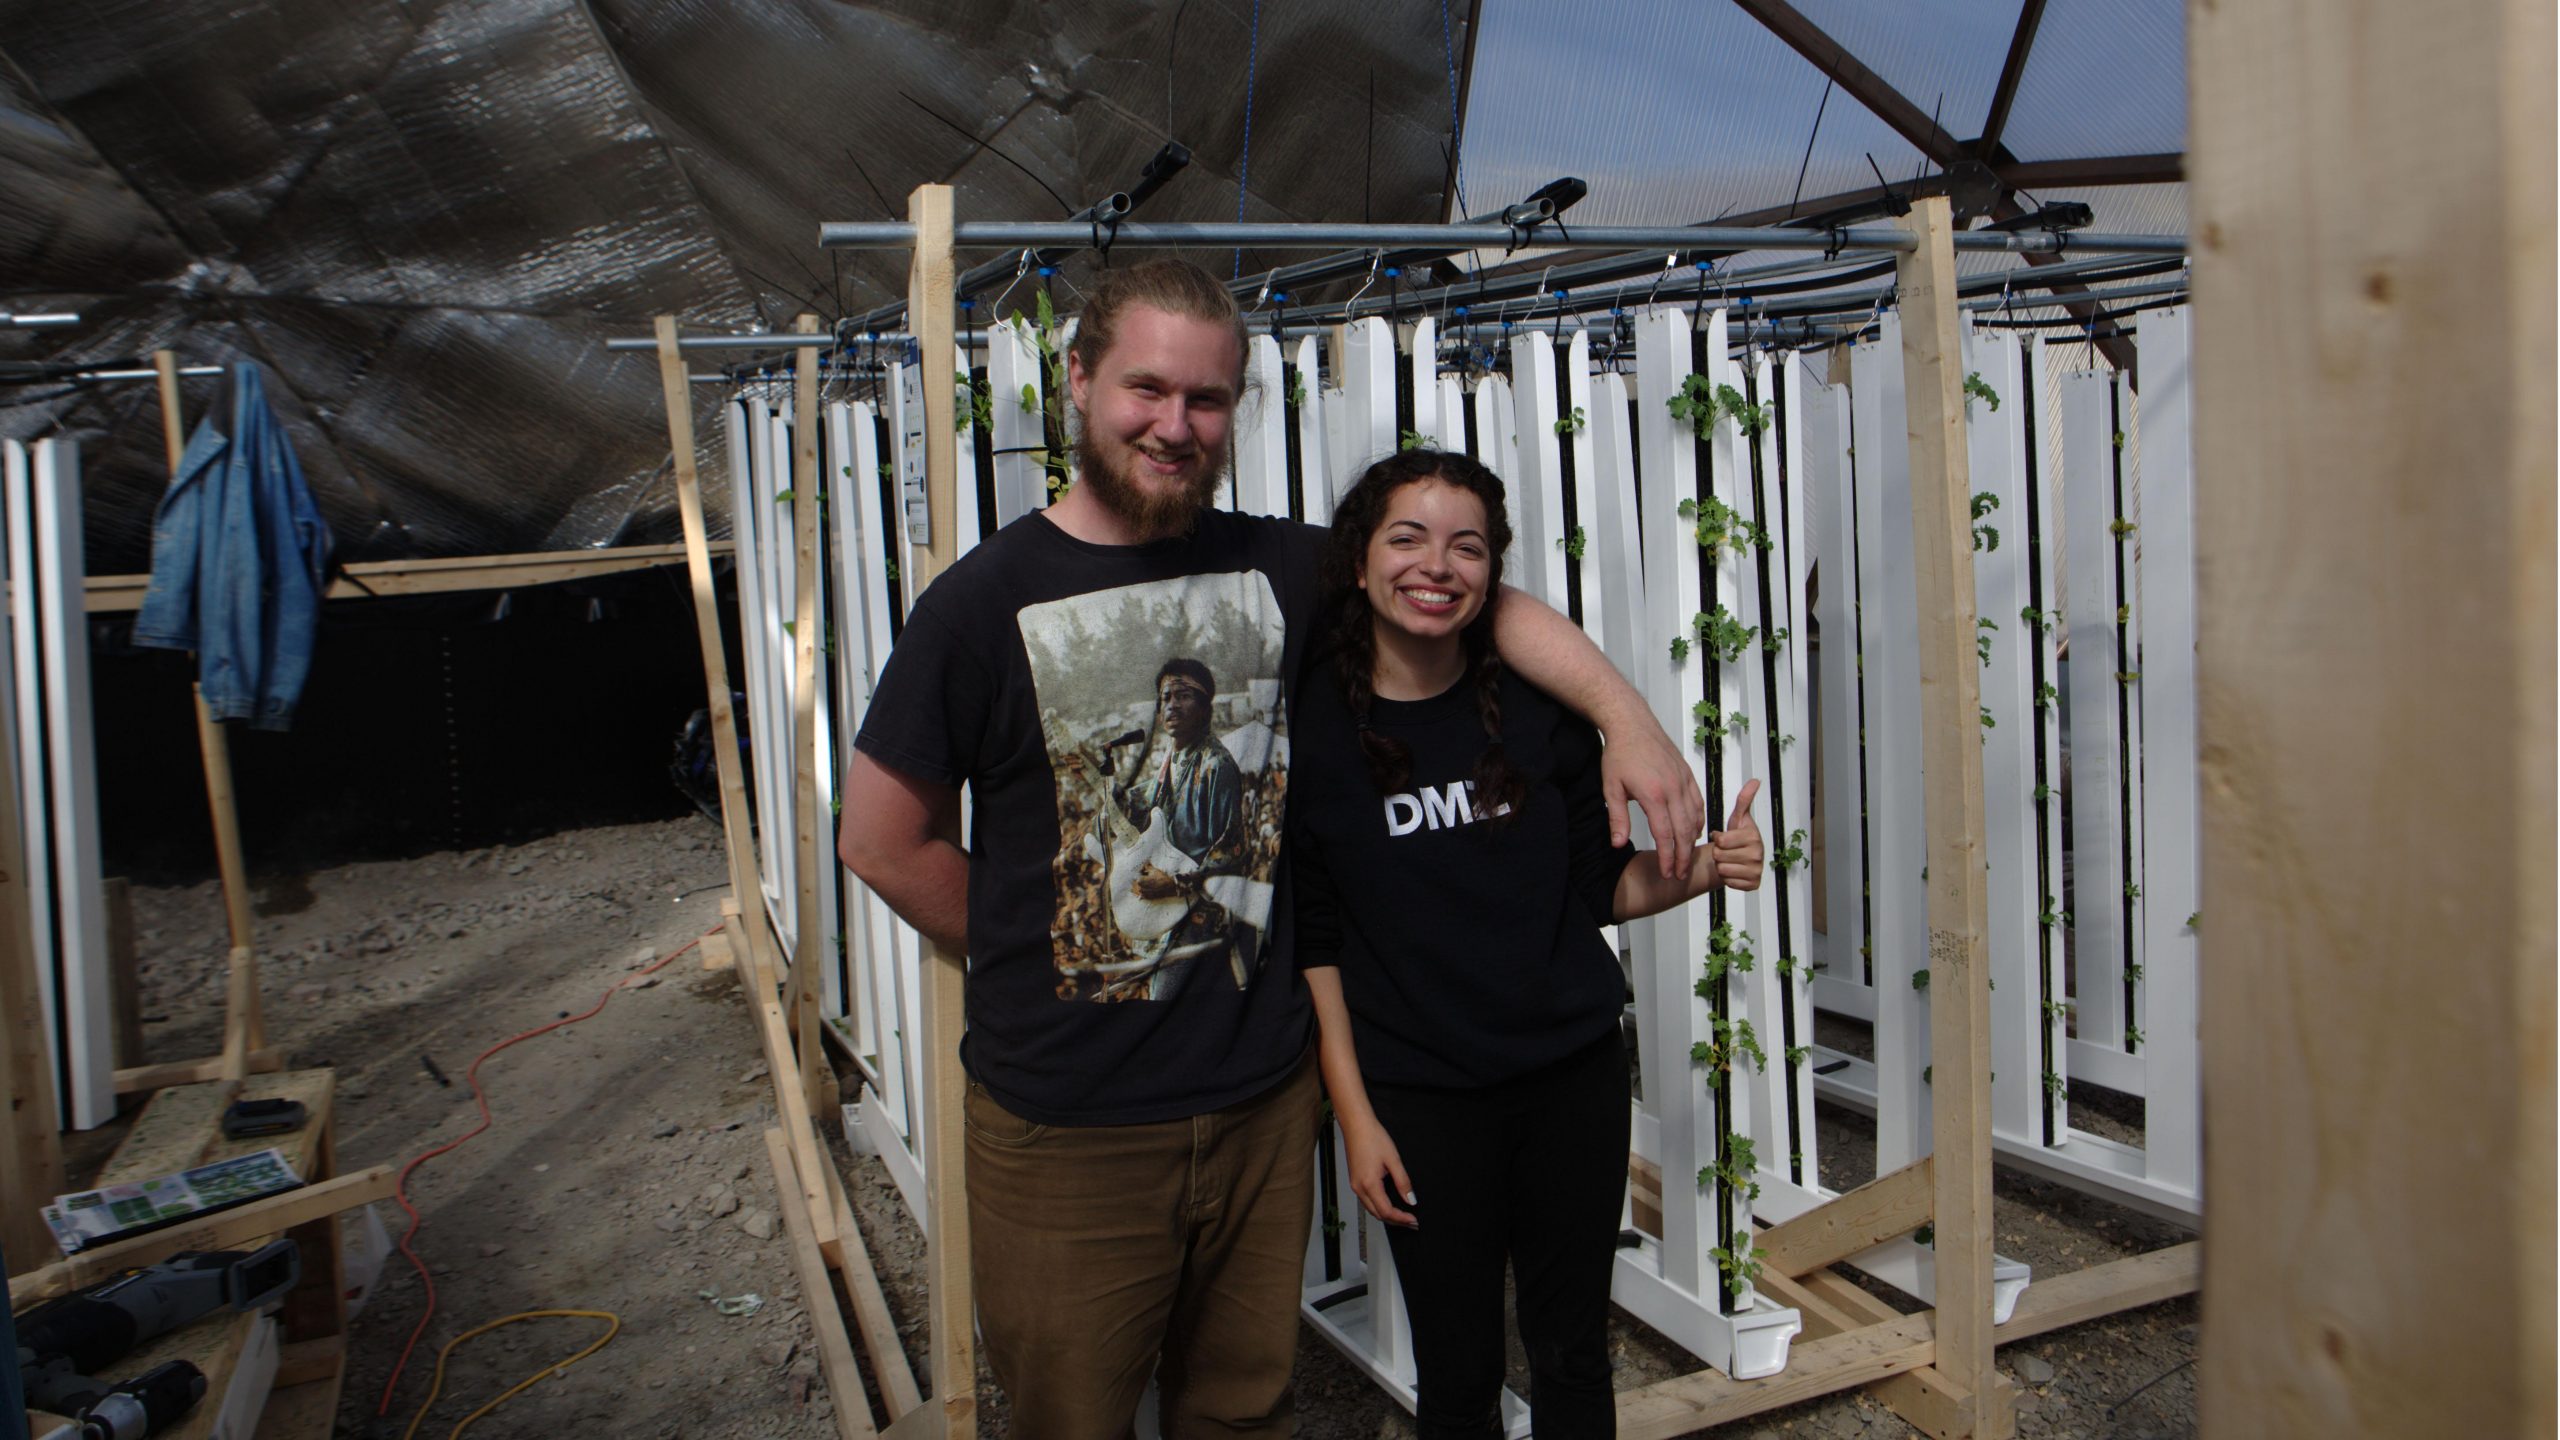 Left to Right: Ben Canning and Stefany Nieto, co-founders of Growing North. PHOTO COURTESY: STEFANY NIETO